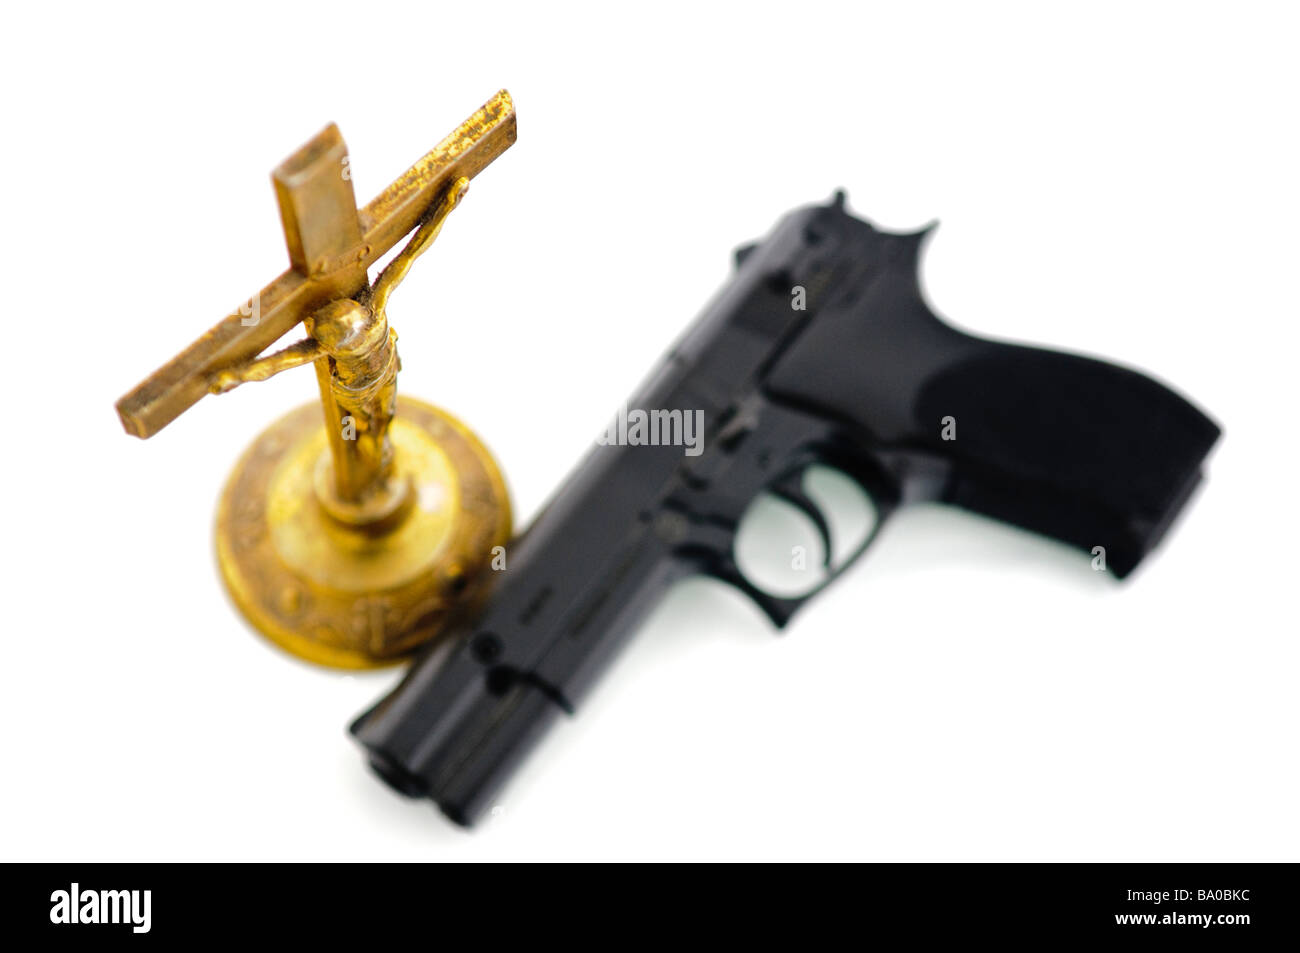 Handgun beside an old brass crucifix NOTE Handgun is imitation toy and marked accordingly Stock Photo